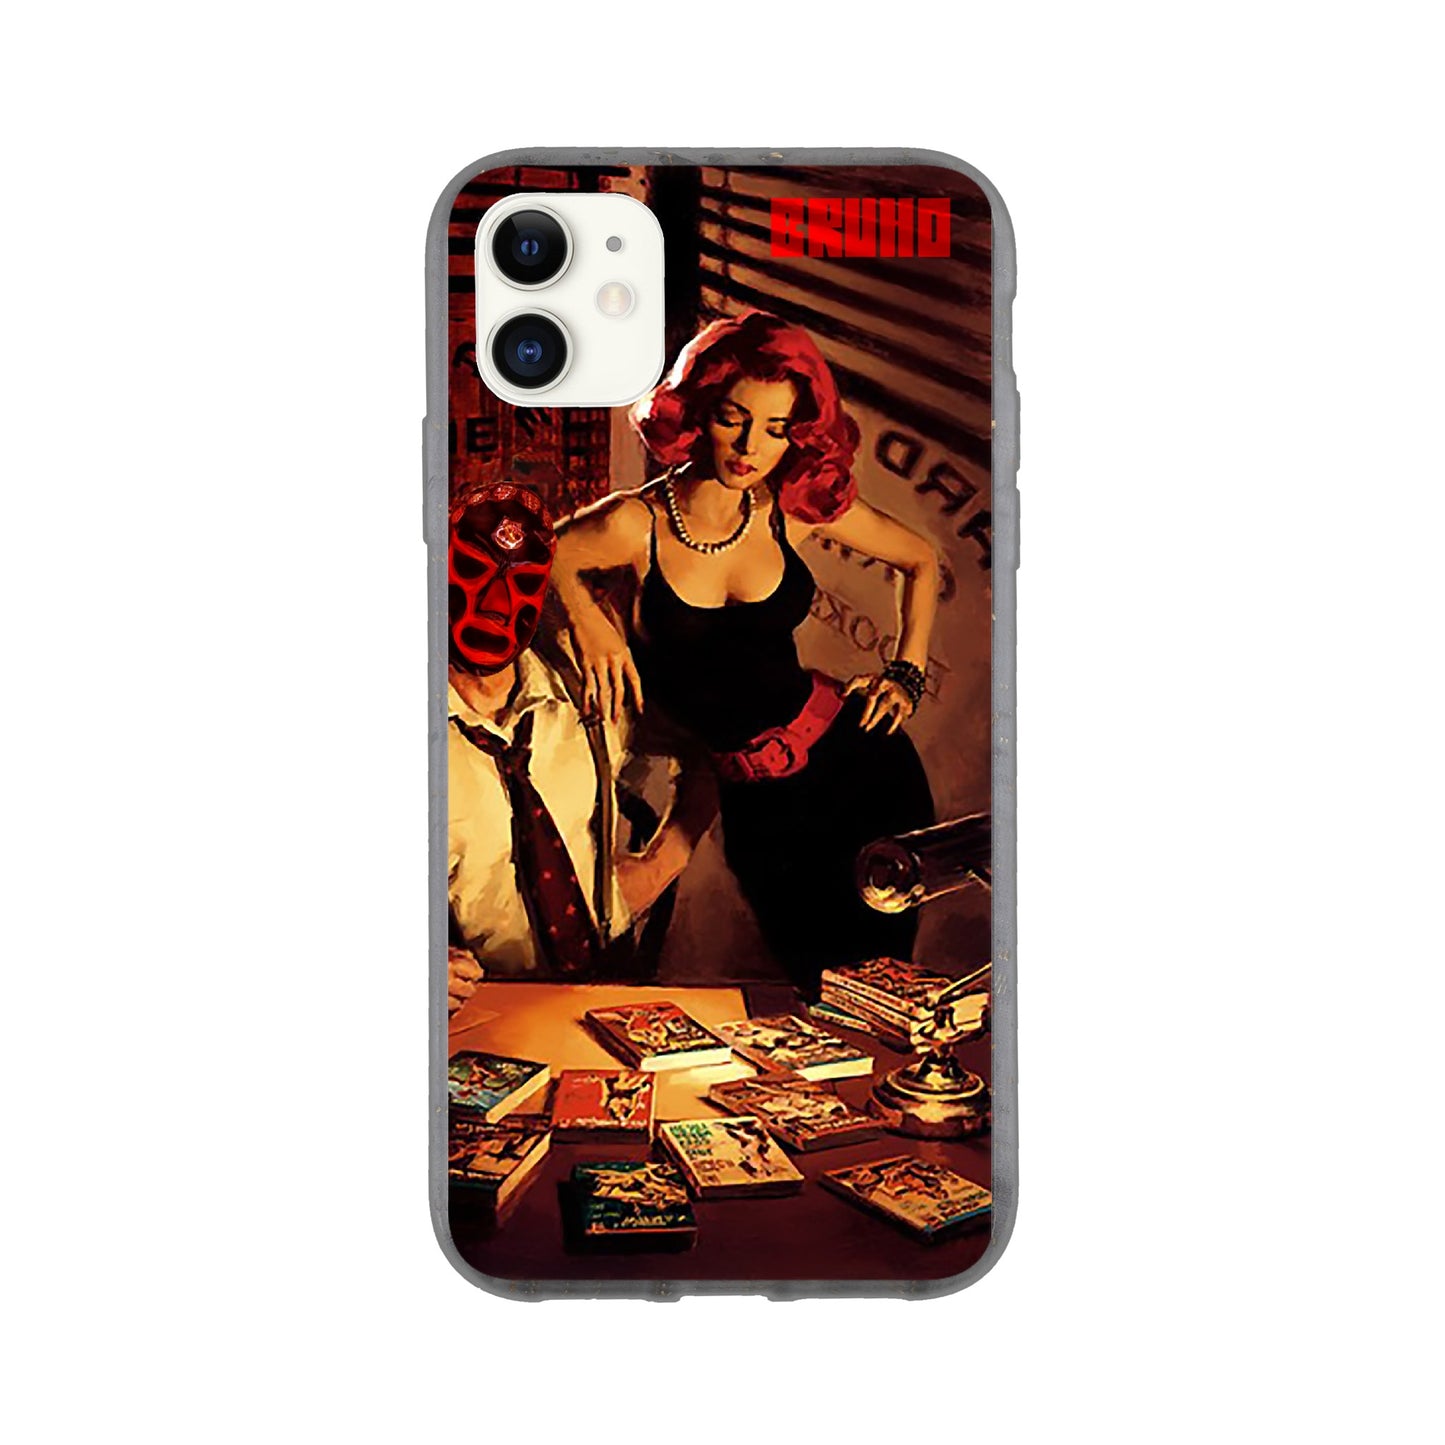 Bookseller Bruho iPhone Case